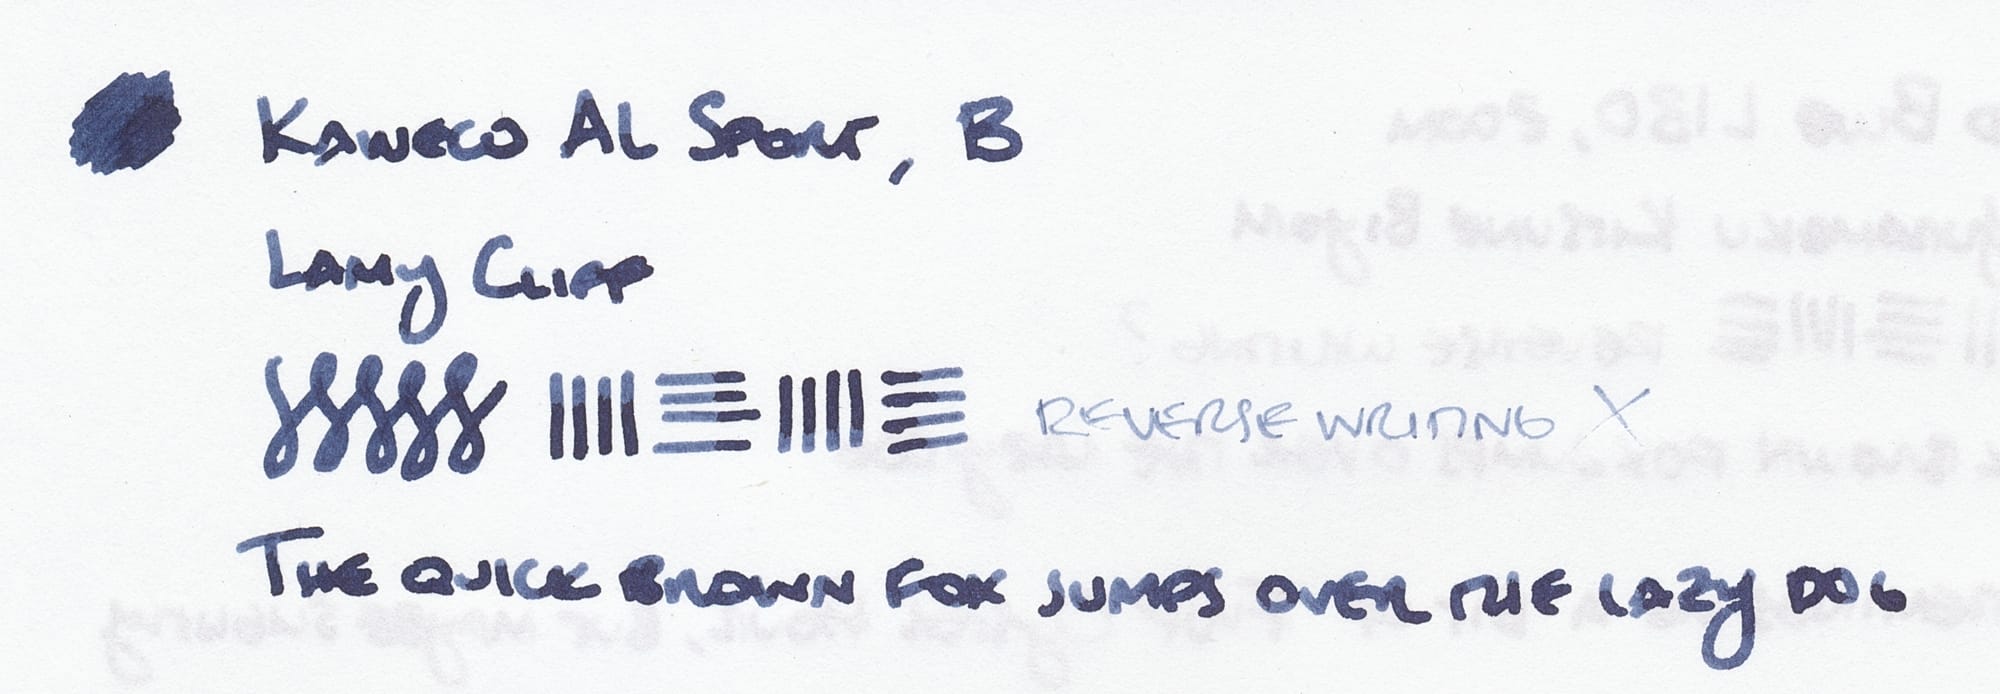 Writing sample using a Kaweco AL Sport fountain pen with a B nib, listing the pen name, ink name, some figure-8s, horizontal and vertical lines, demonstration of reverse writing, and "The quick brown fox jumps over the lazy dog"